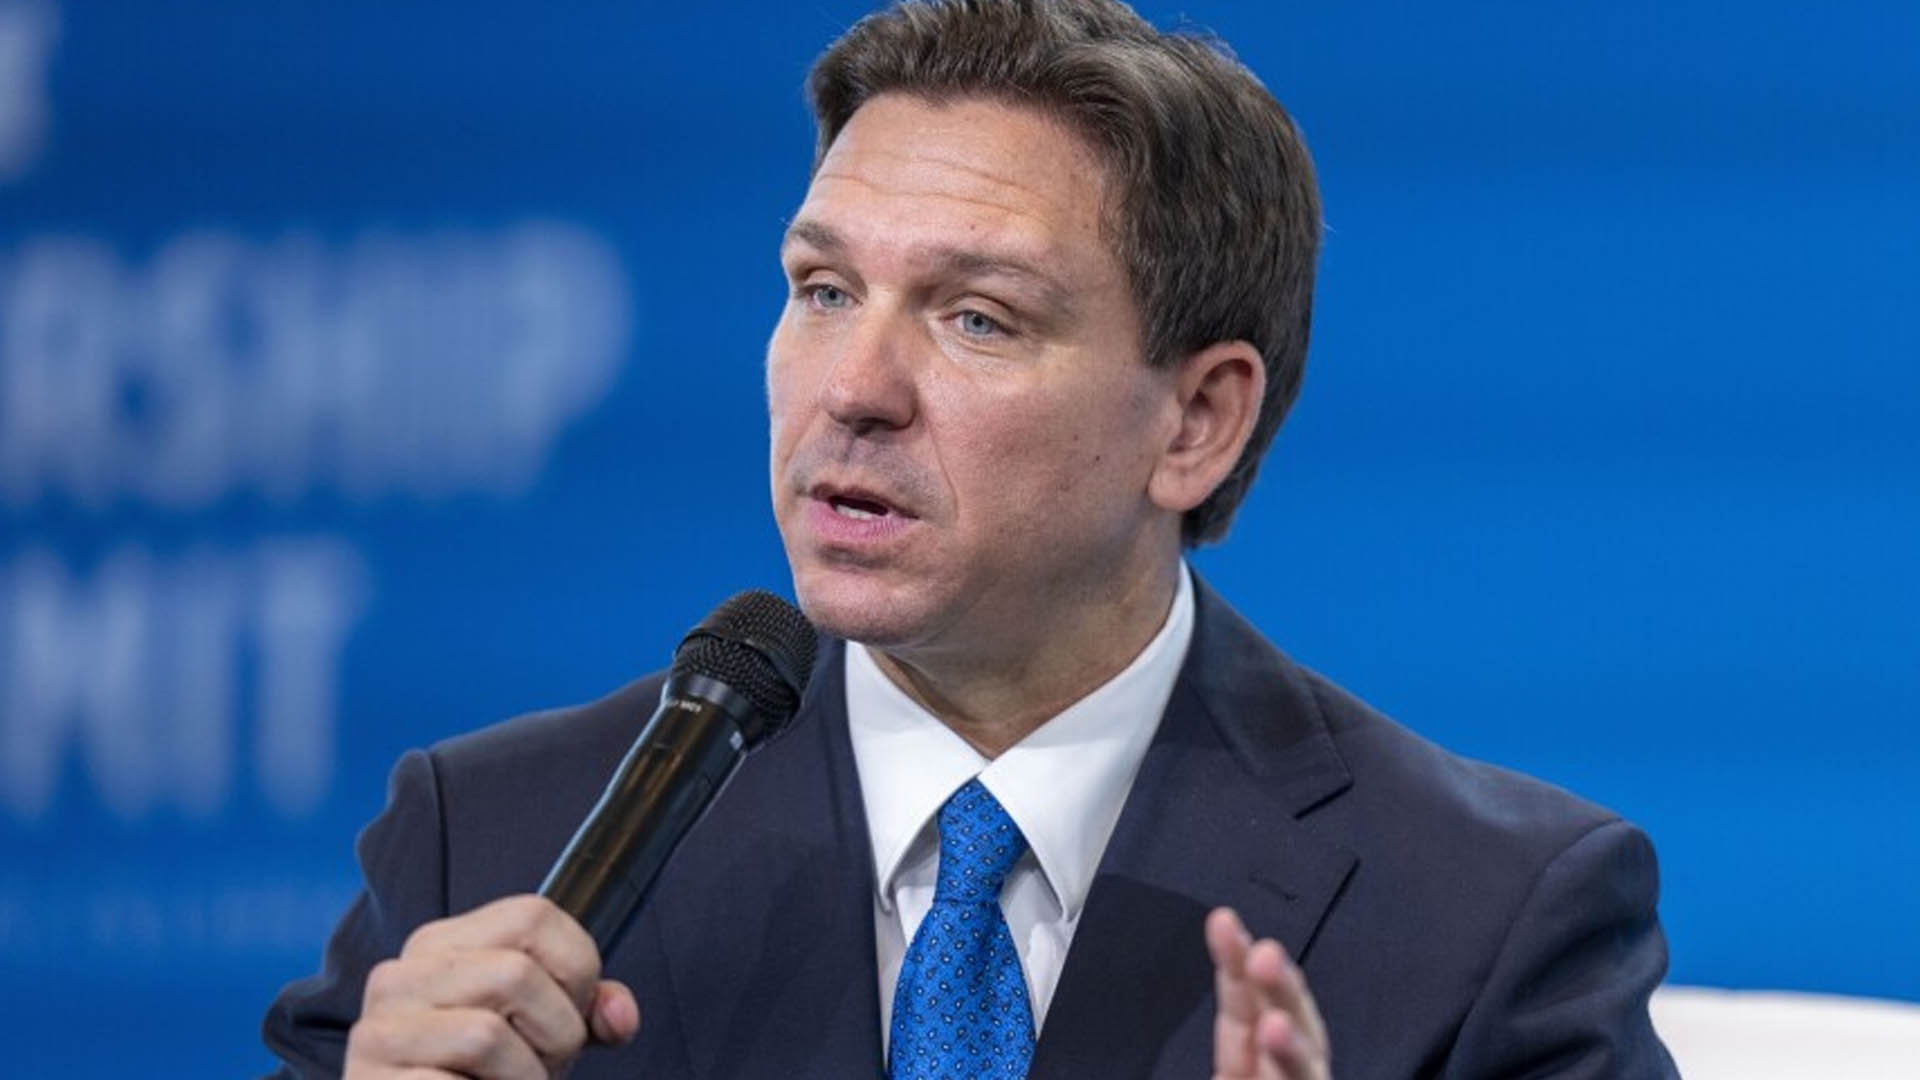 Florida's DeSantis signs one of country's most restrictive social media bans for minors